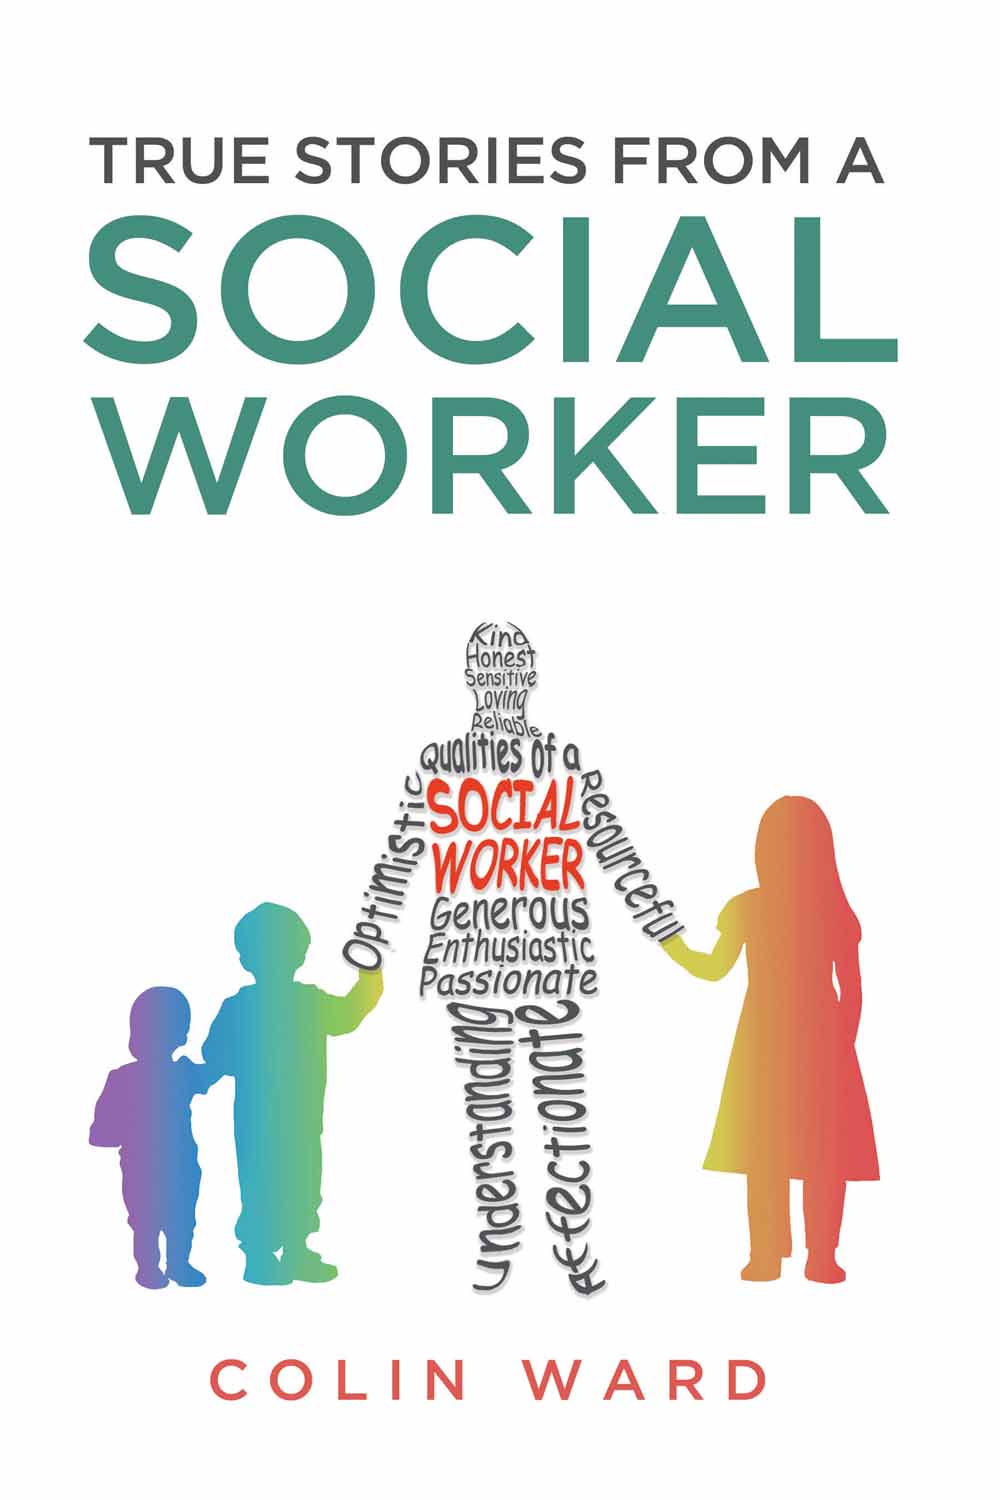 True Stories from a Social Worker by Colin Ward